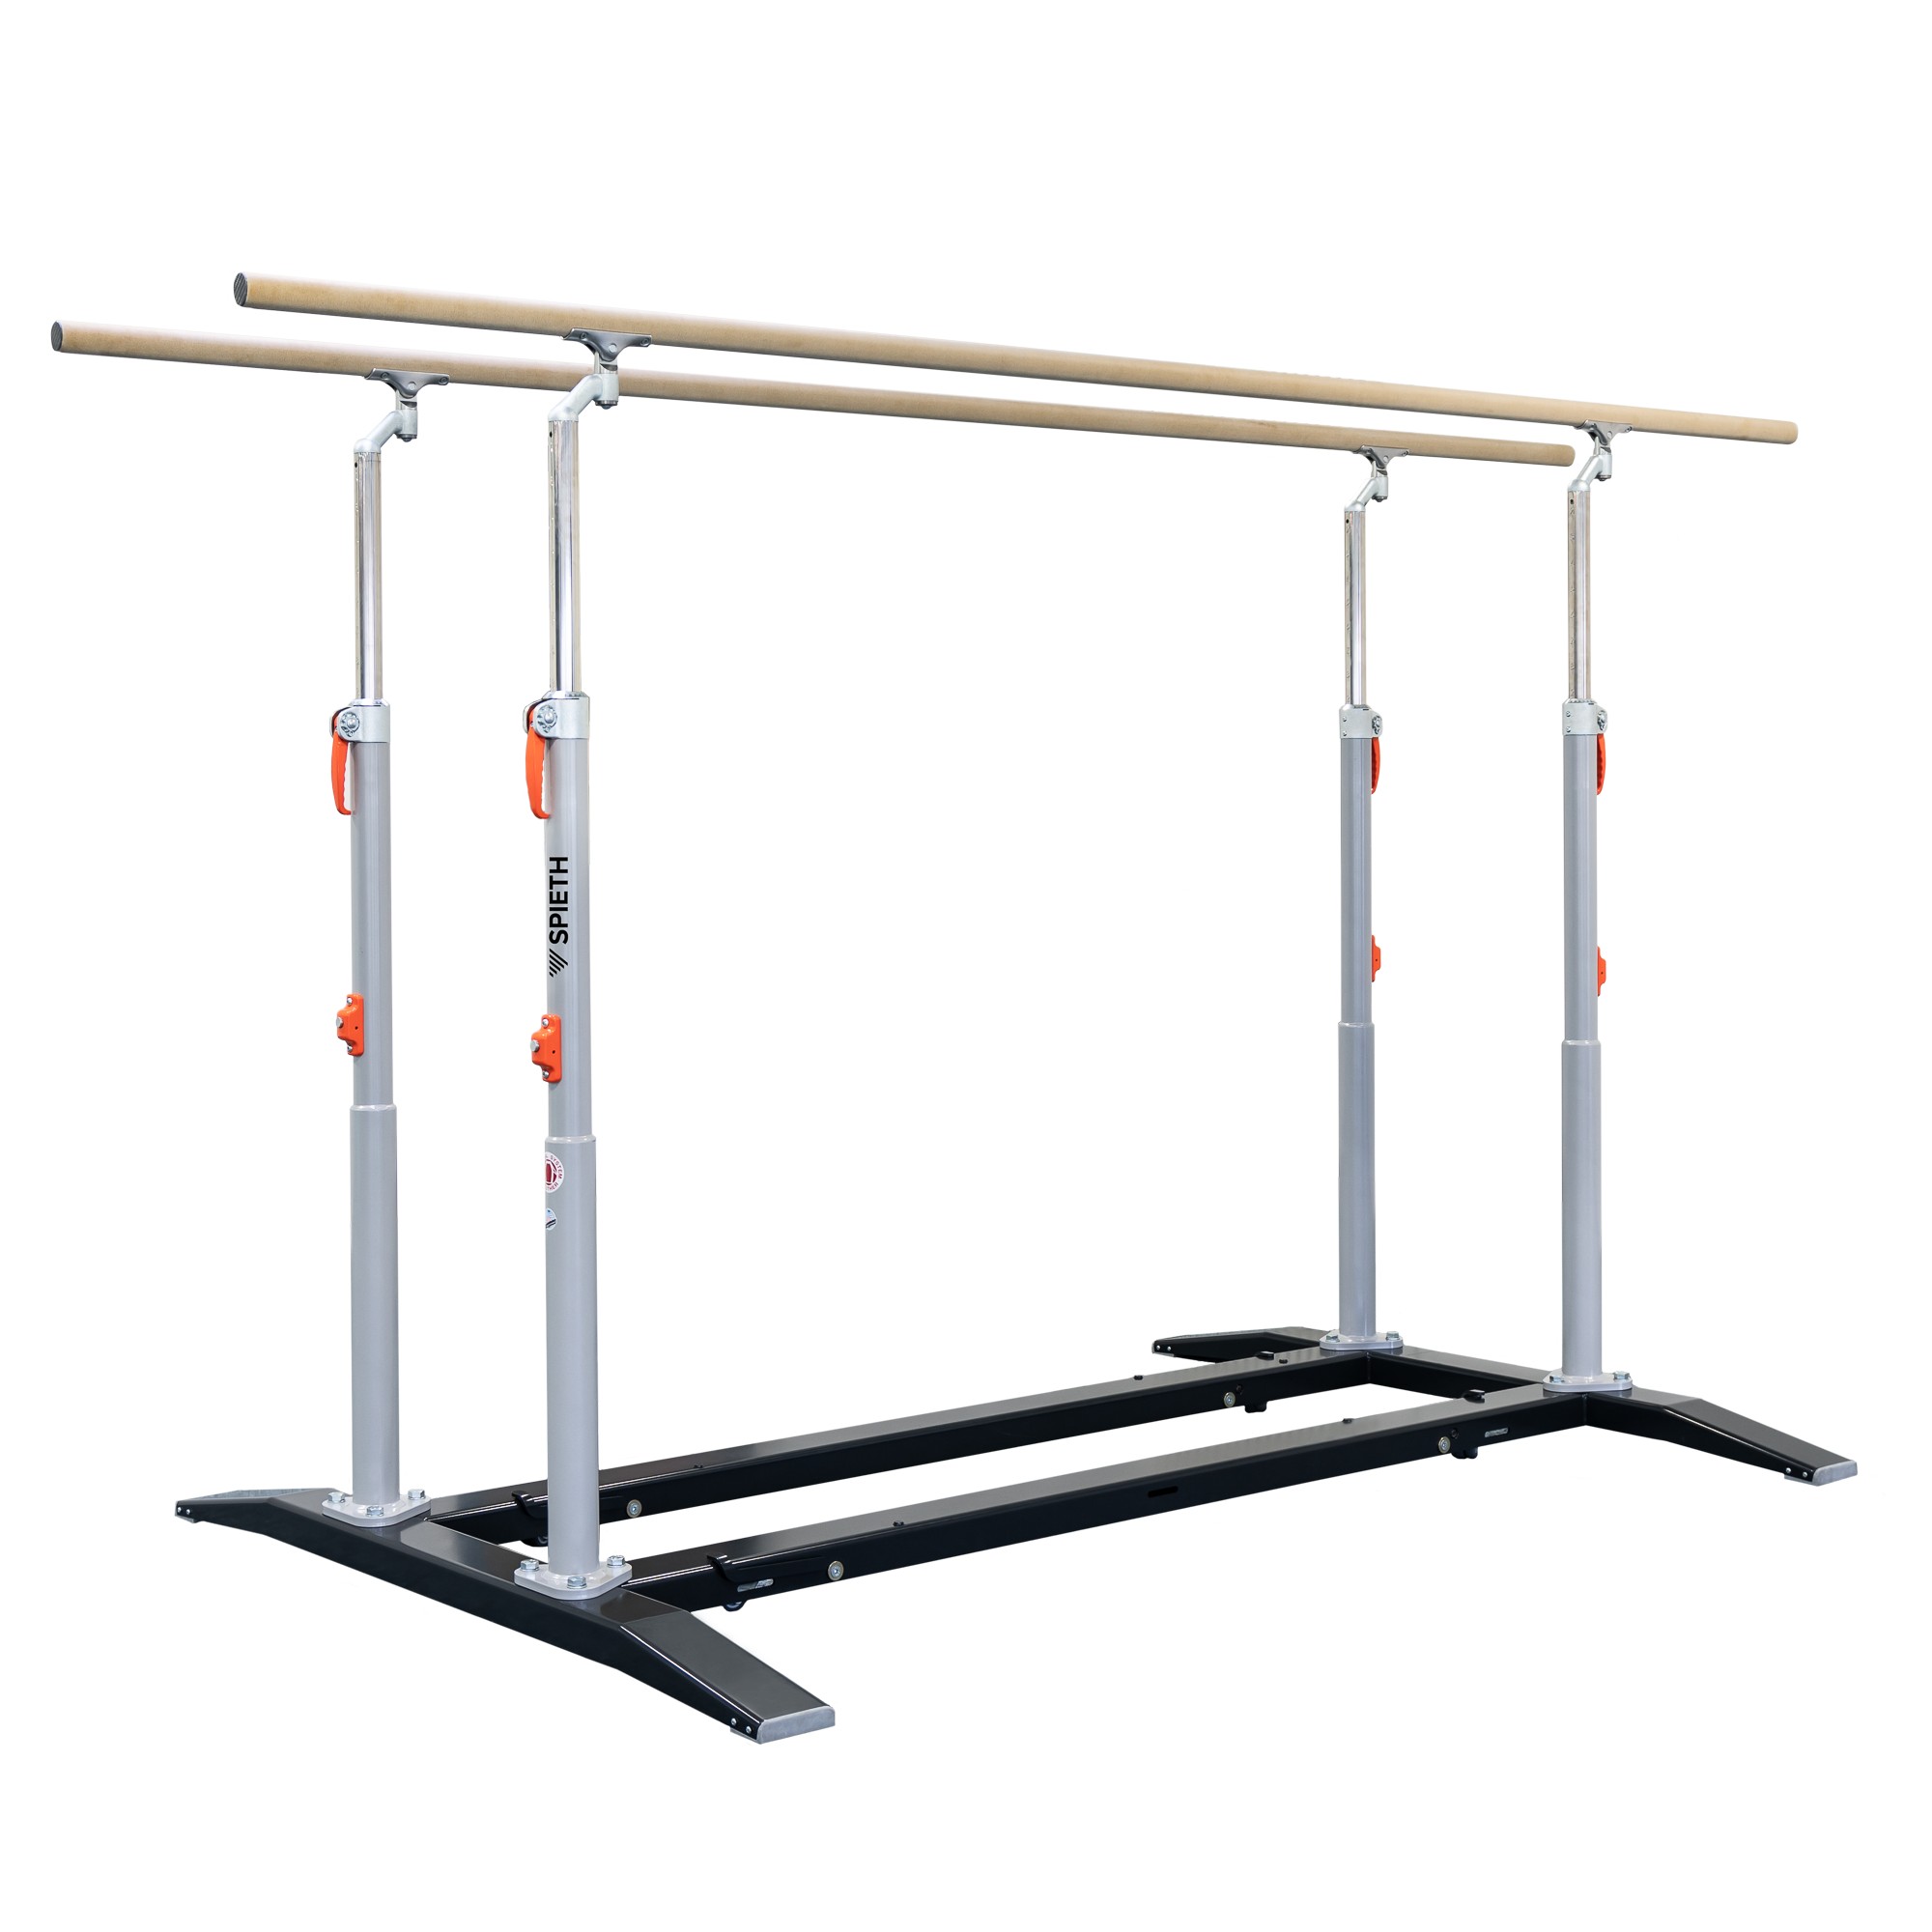 Parallel Bars "Melbourne Pro" with integrated wheel system